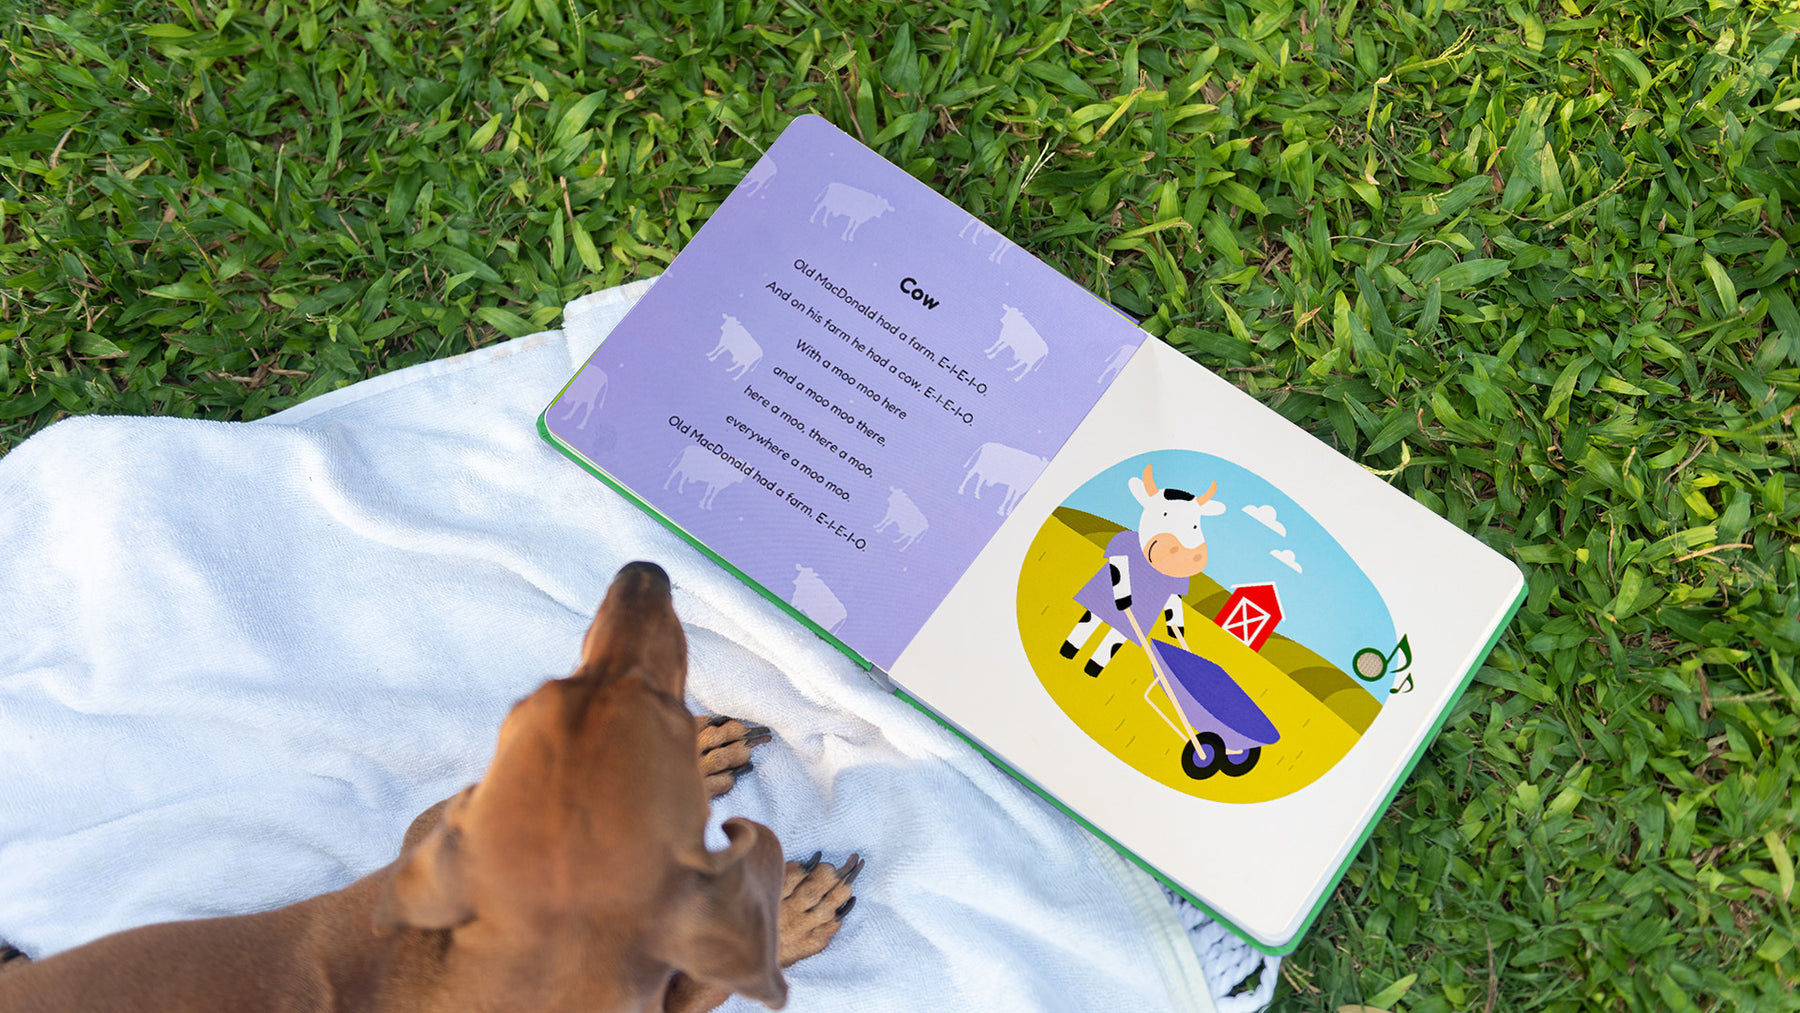 A dog is sitting next to a sound book laying on the grass. Musical books for kids, toddler musical activities, kids learning, toddler education.